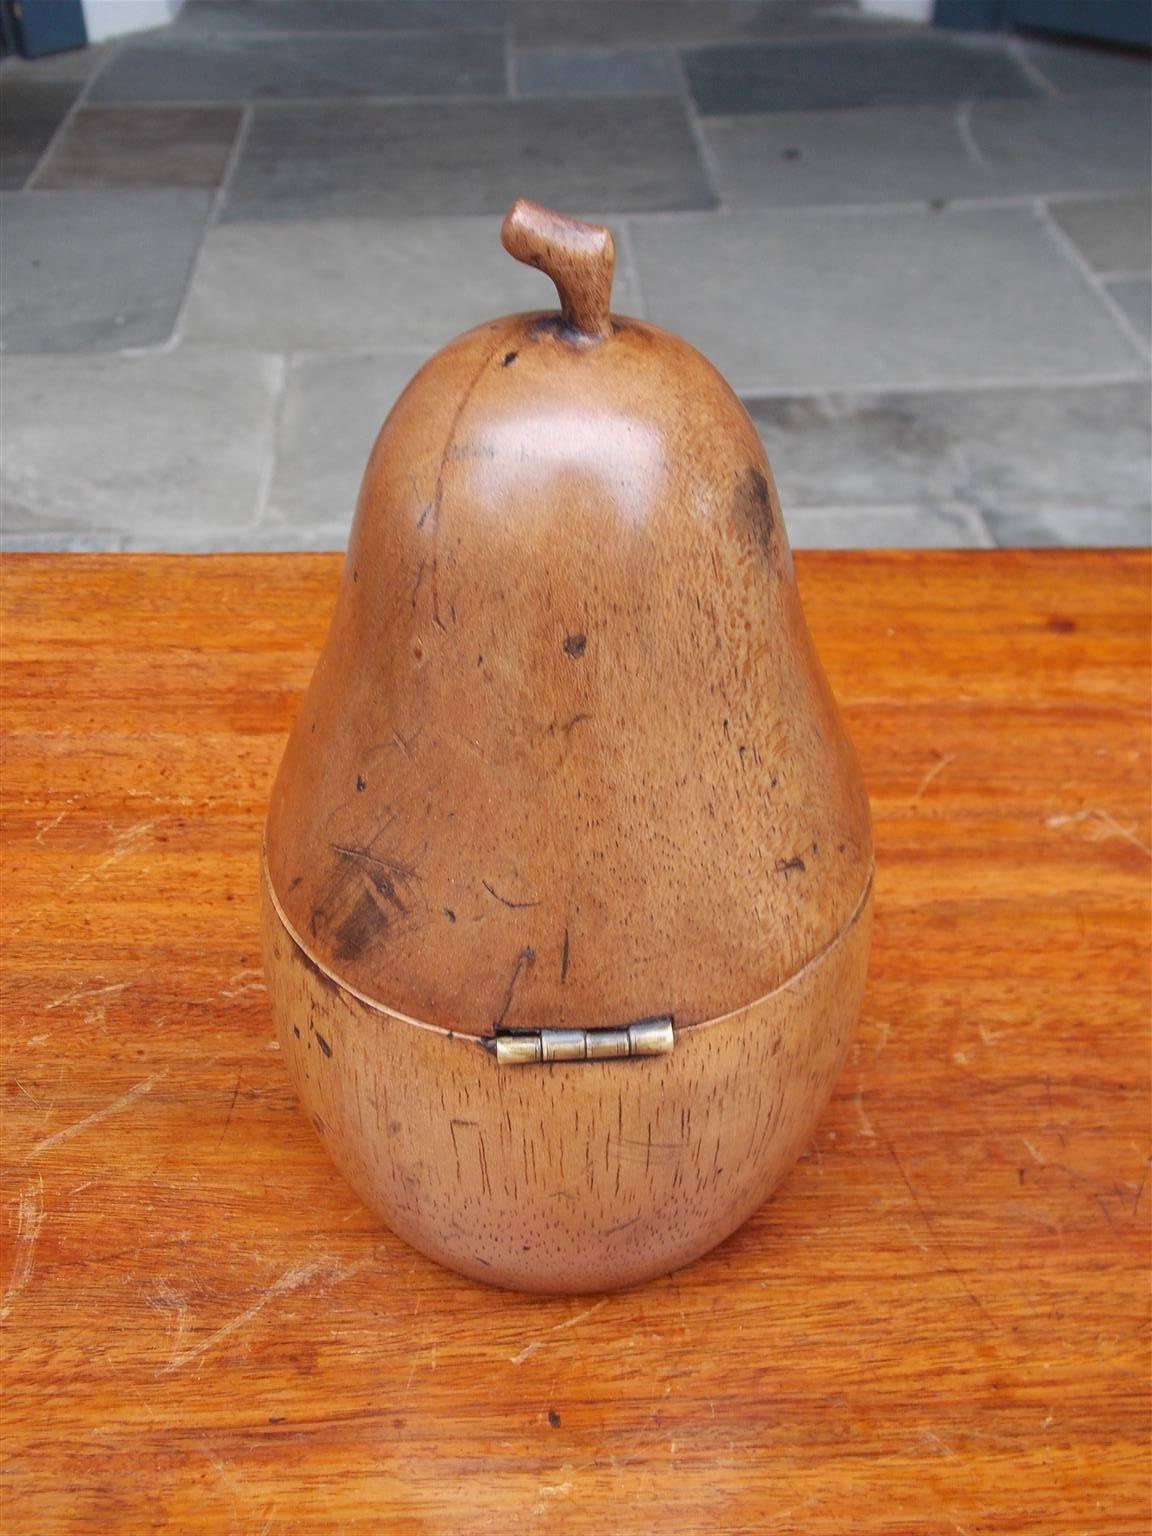 Hand-Carved English Cherry Pear Shaped Hinged Tea Caddy with Lined Foil Interior. 20th Cent.